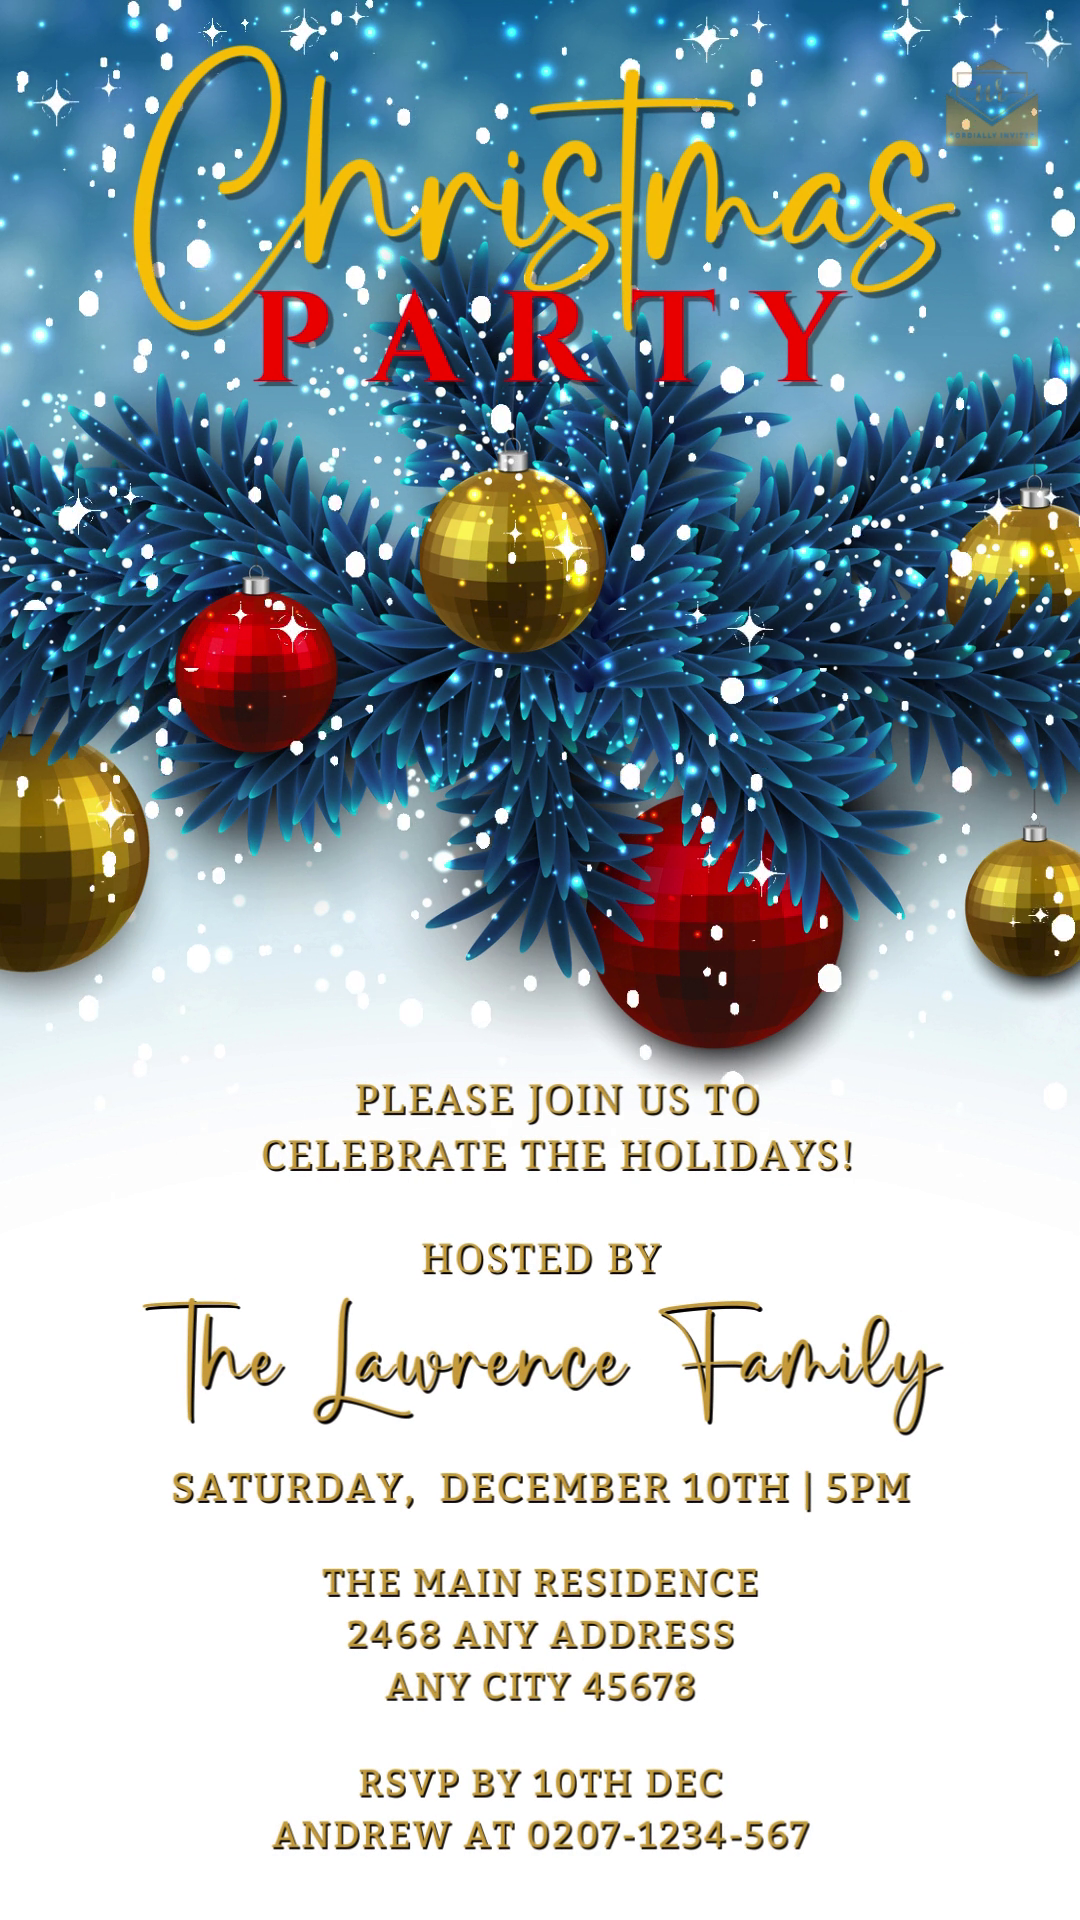 Snowy Elegance Blue Leaves Christmas Party Video Invite featuring digital ornaments, editable via Canva for personalized event details, perfect for eco-friendly electronic invitations.